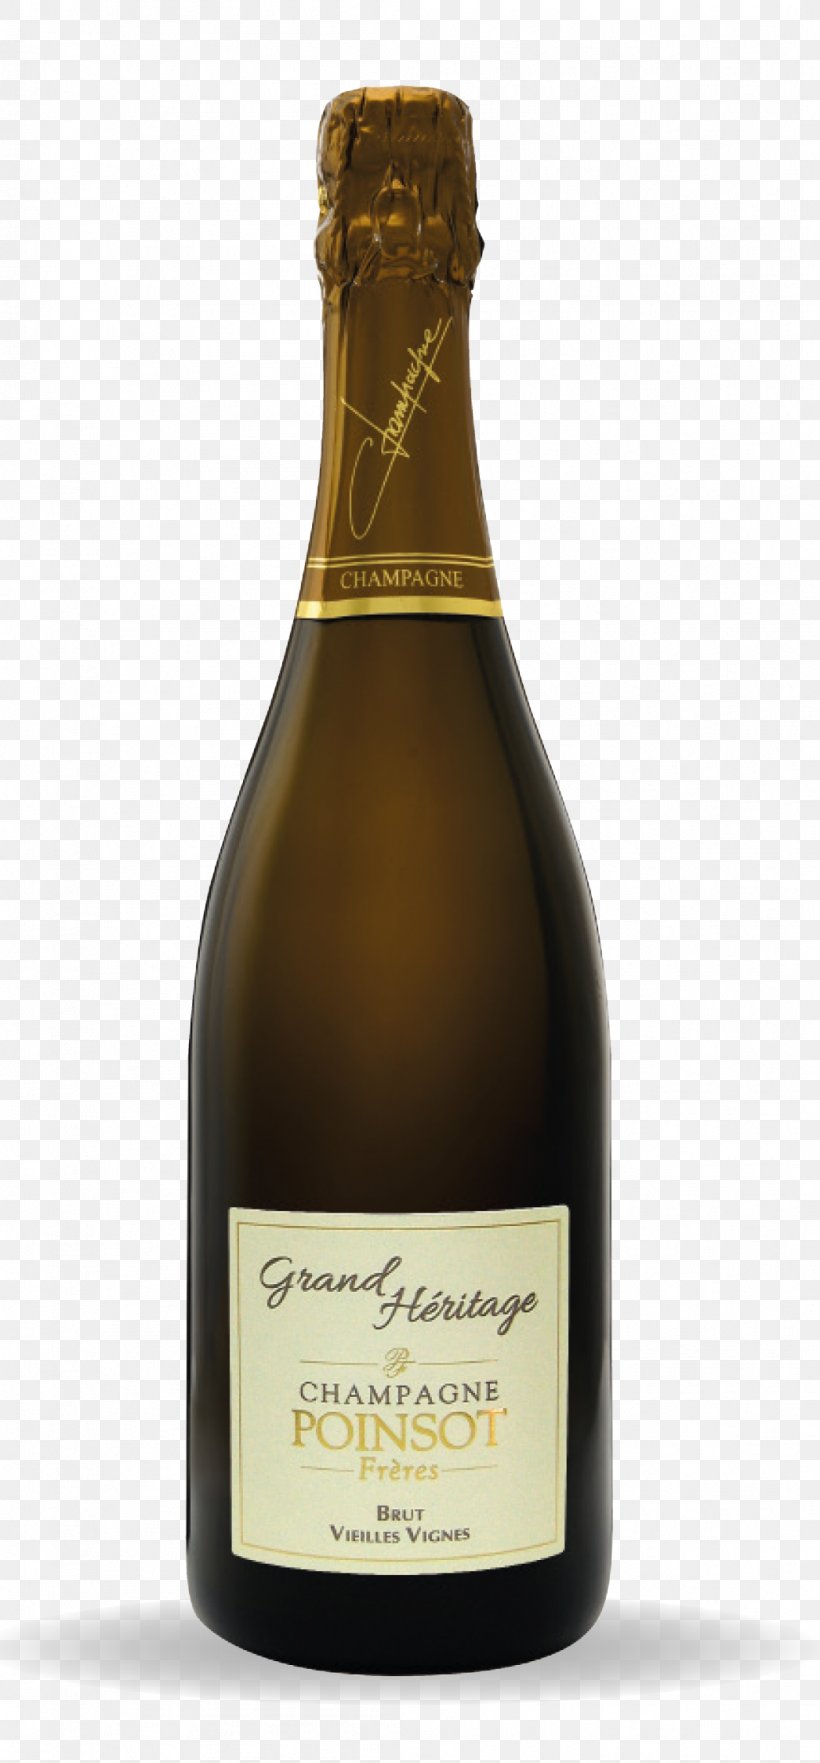 Champagne Wine Glass Bottle, PNG, 1046x2249px, Champagne, Alcoholic Beverage, Bottle, Drink, Glass Download Free